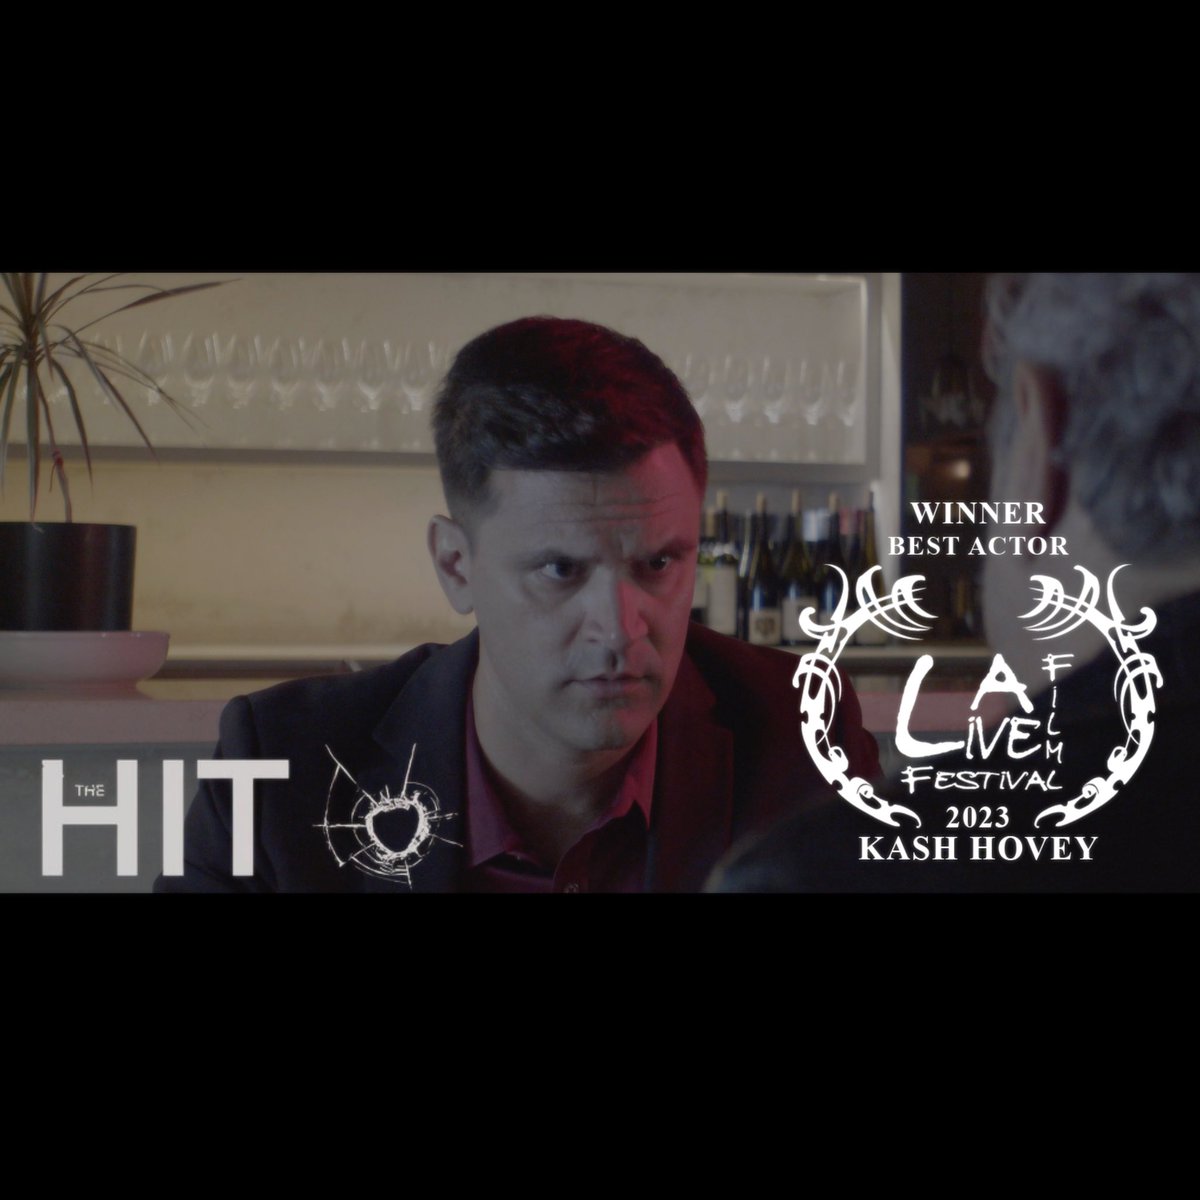 I’m honored to receive the Best Actor in a Mystery/Thriller Award 🏆 for “The Hit” by @filmfestlalive. So proud of our cast, crew and team who worked on the film and took home awards including Best Mystery/Thriller 🏆 imdb.com//name/nm442636…